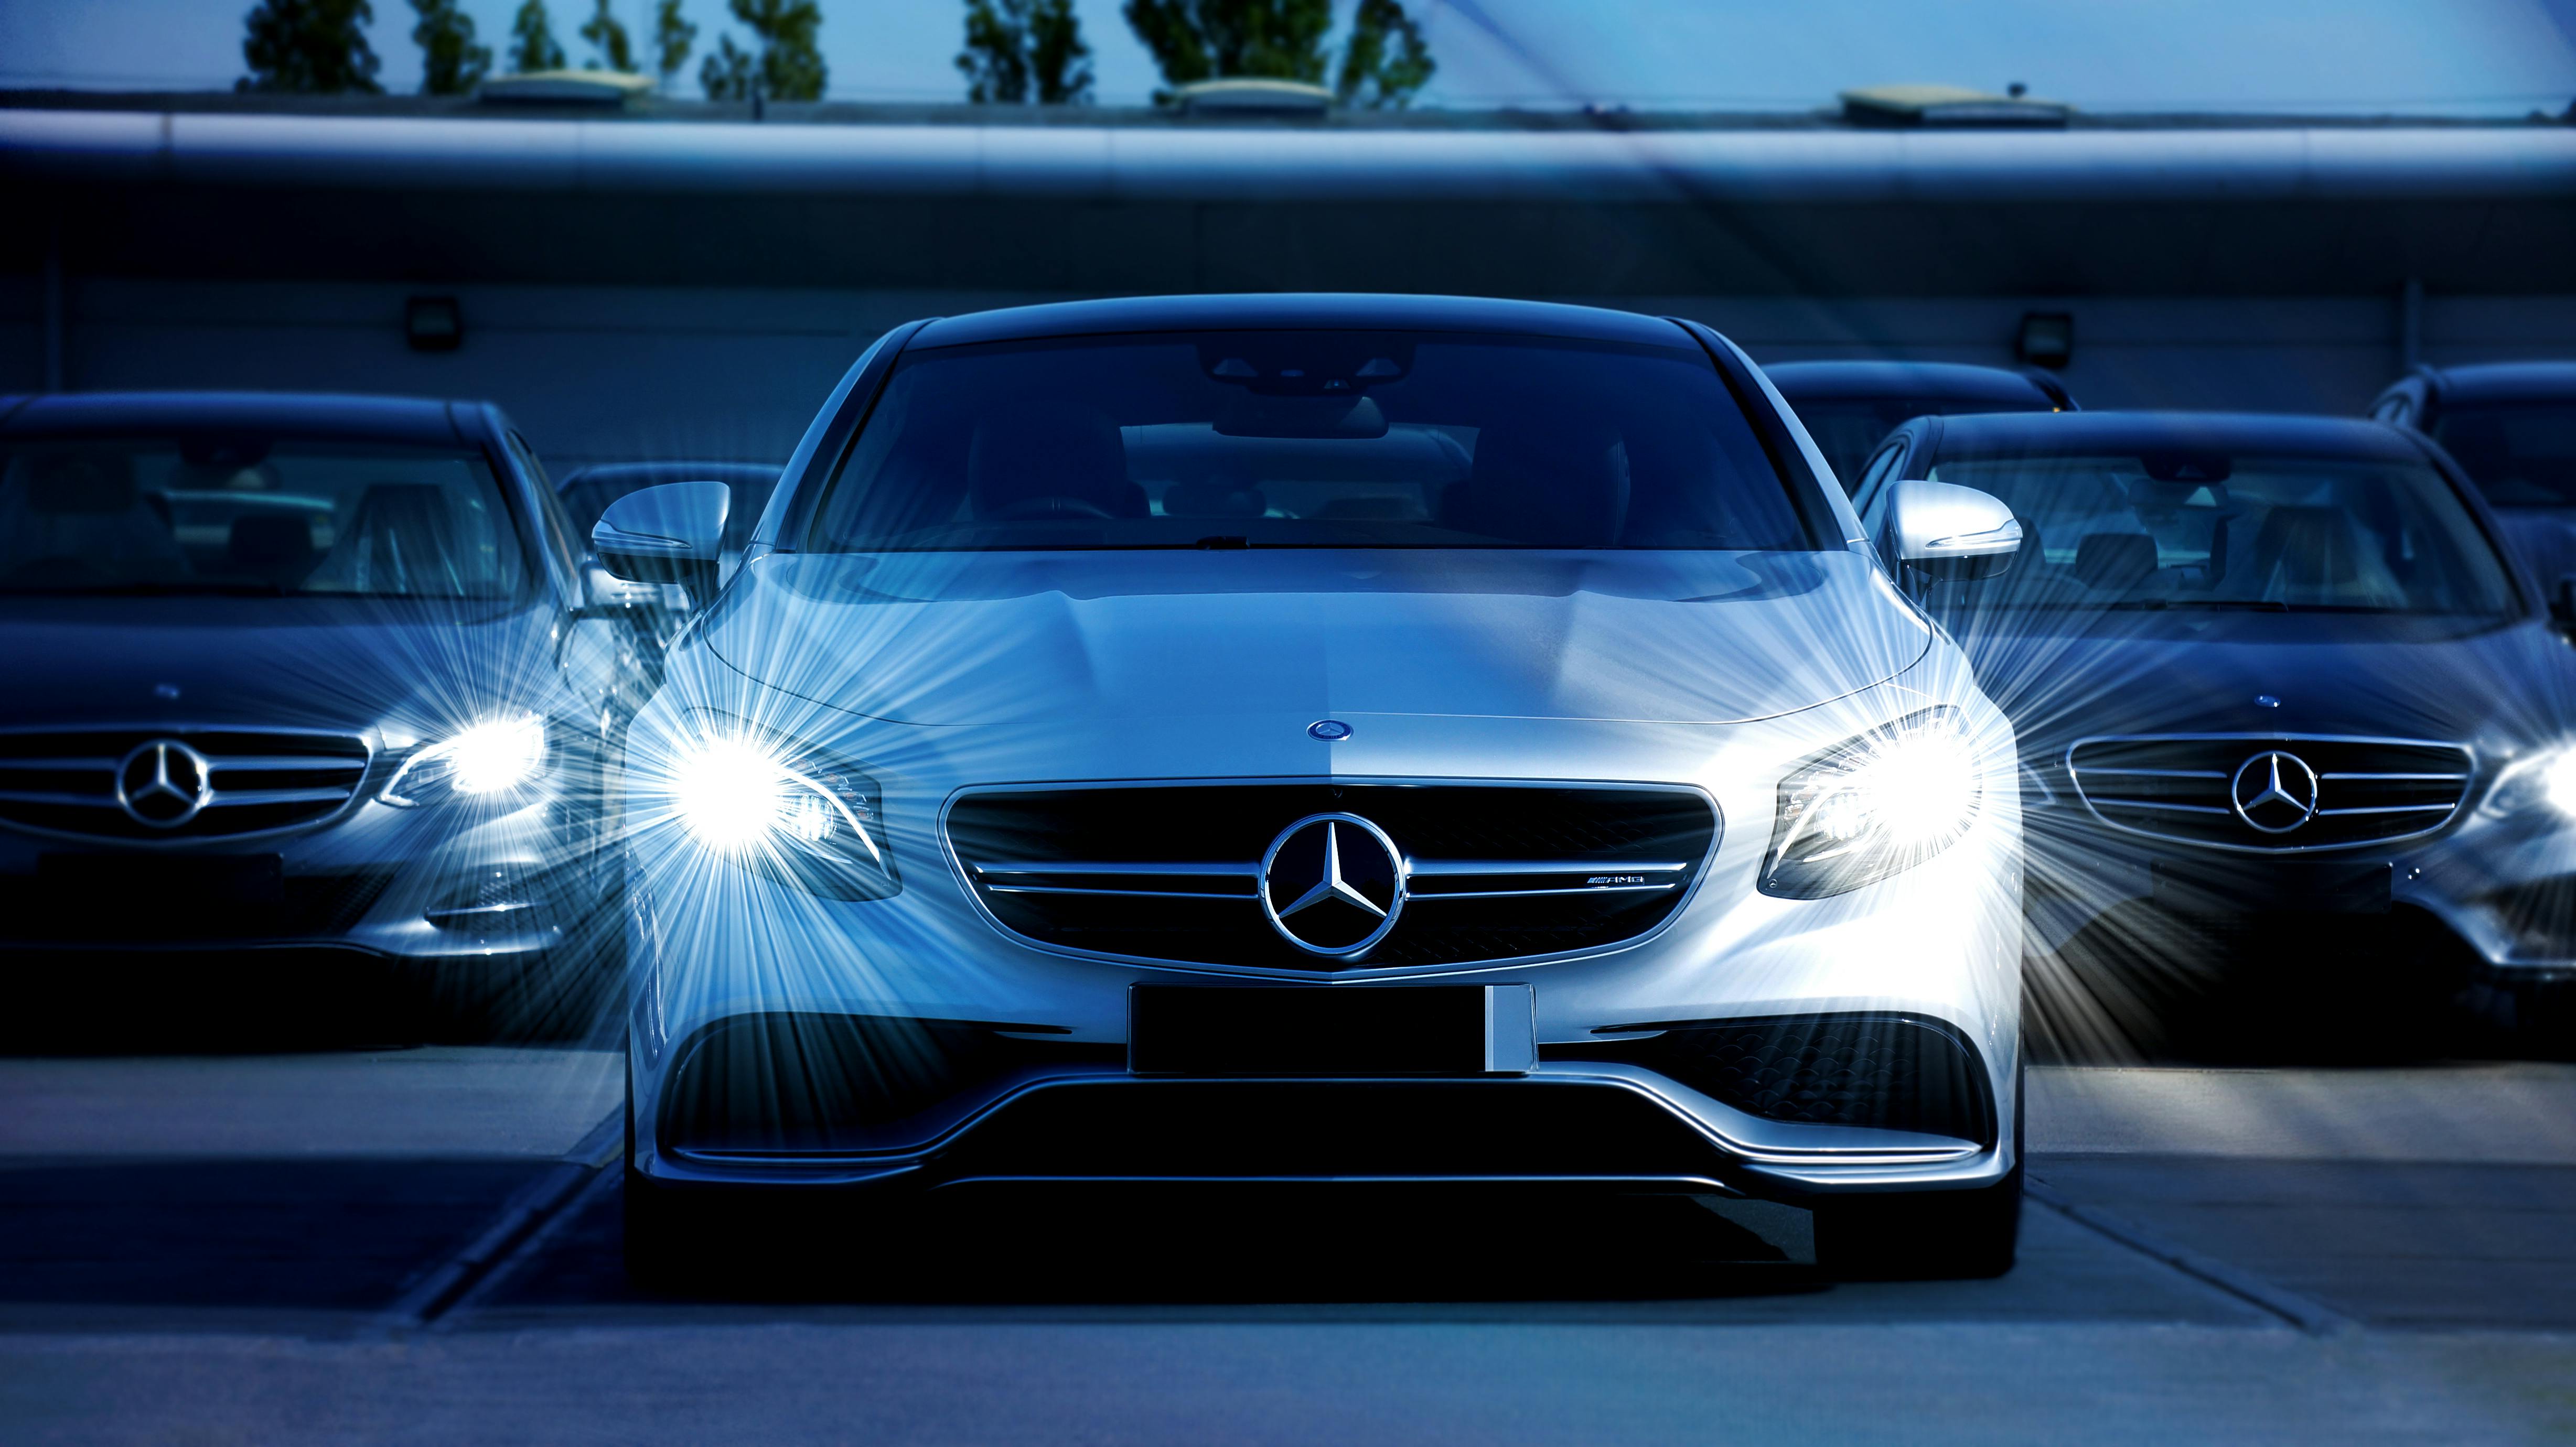 Mercedes Photos, Download The BEST Free Mercedes Stock Photos & HD Images